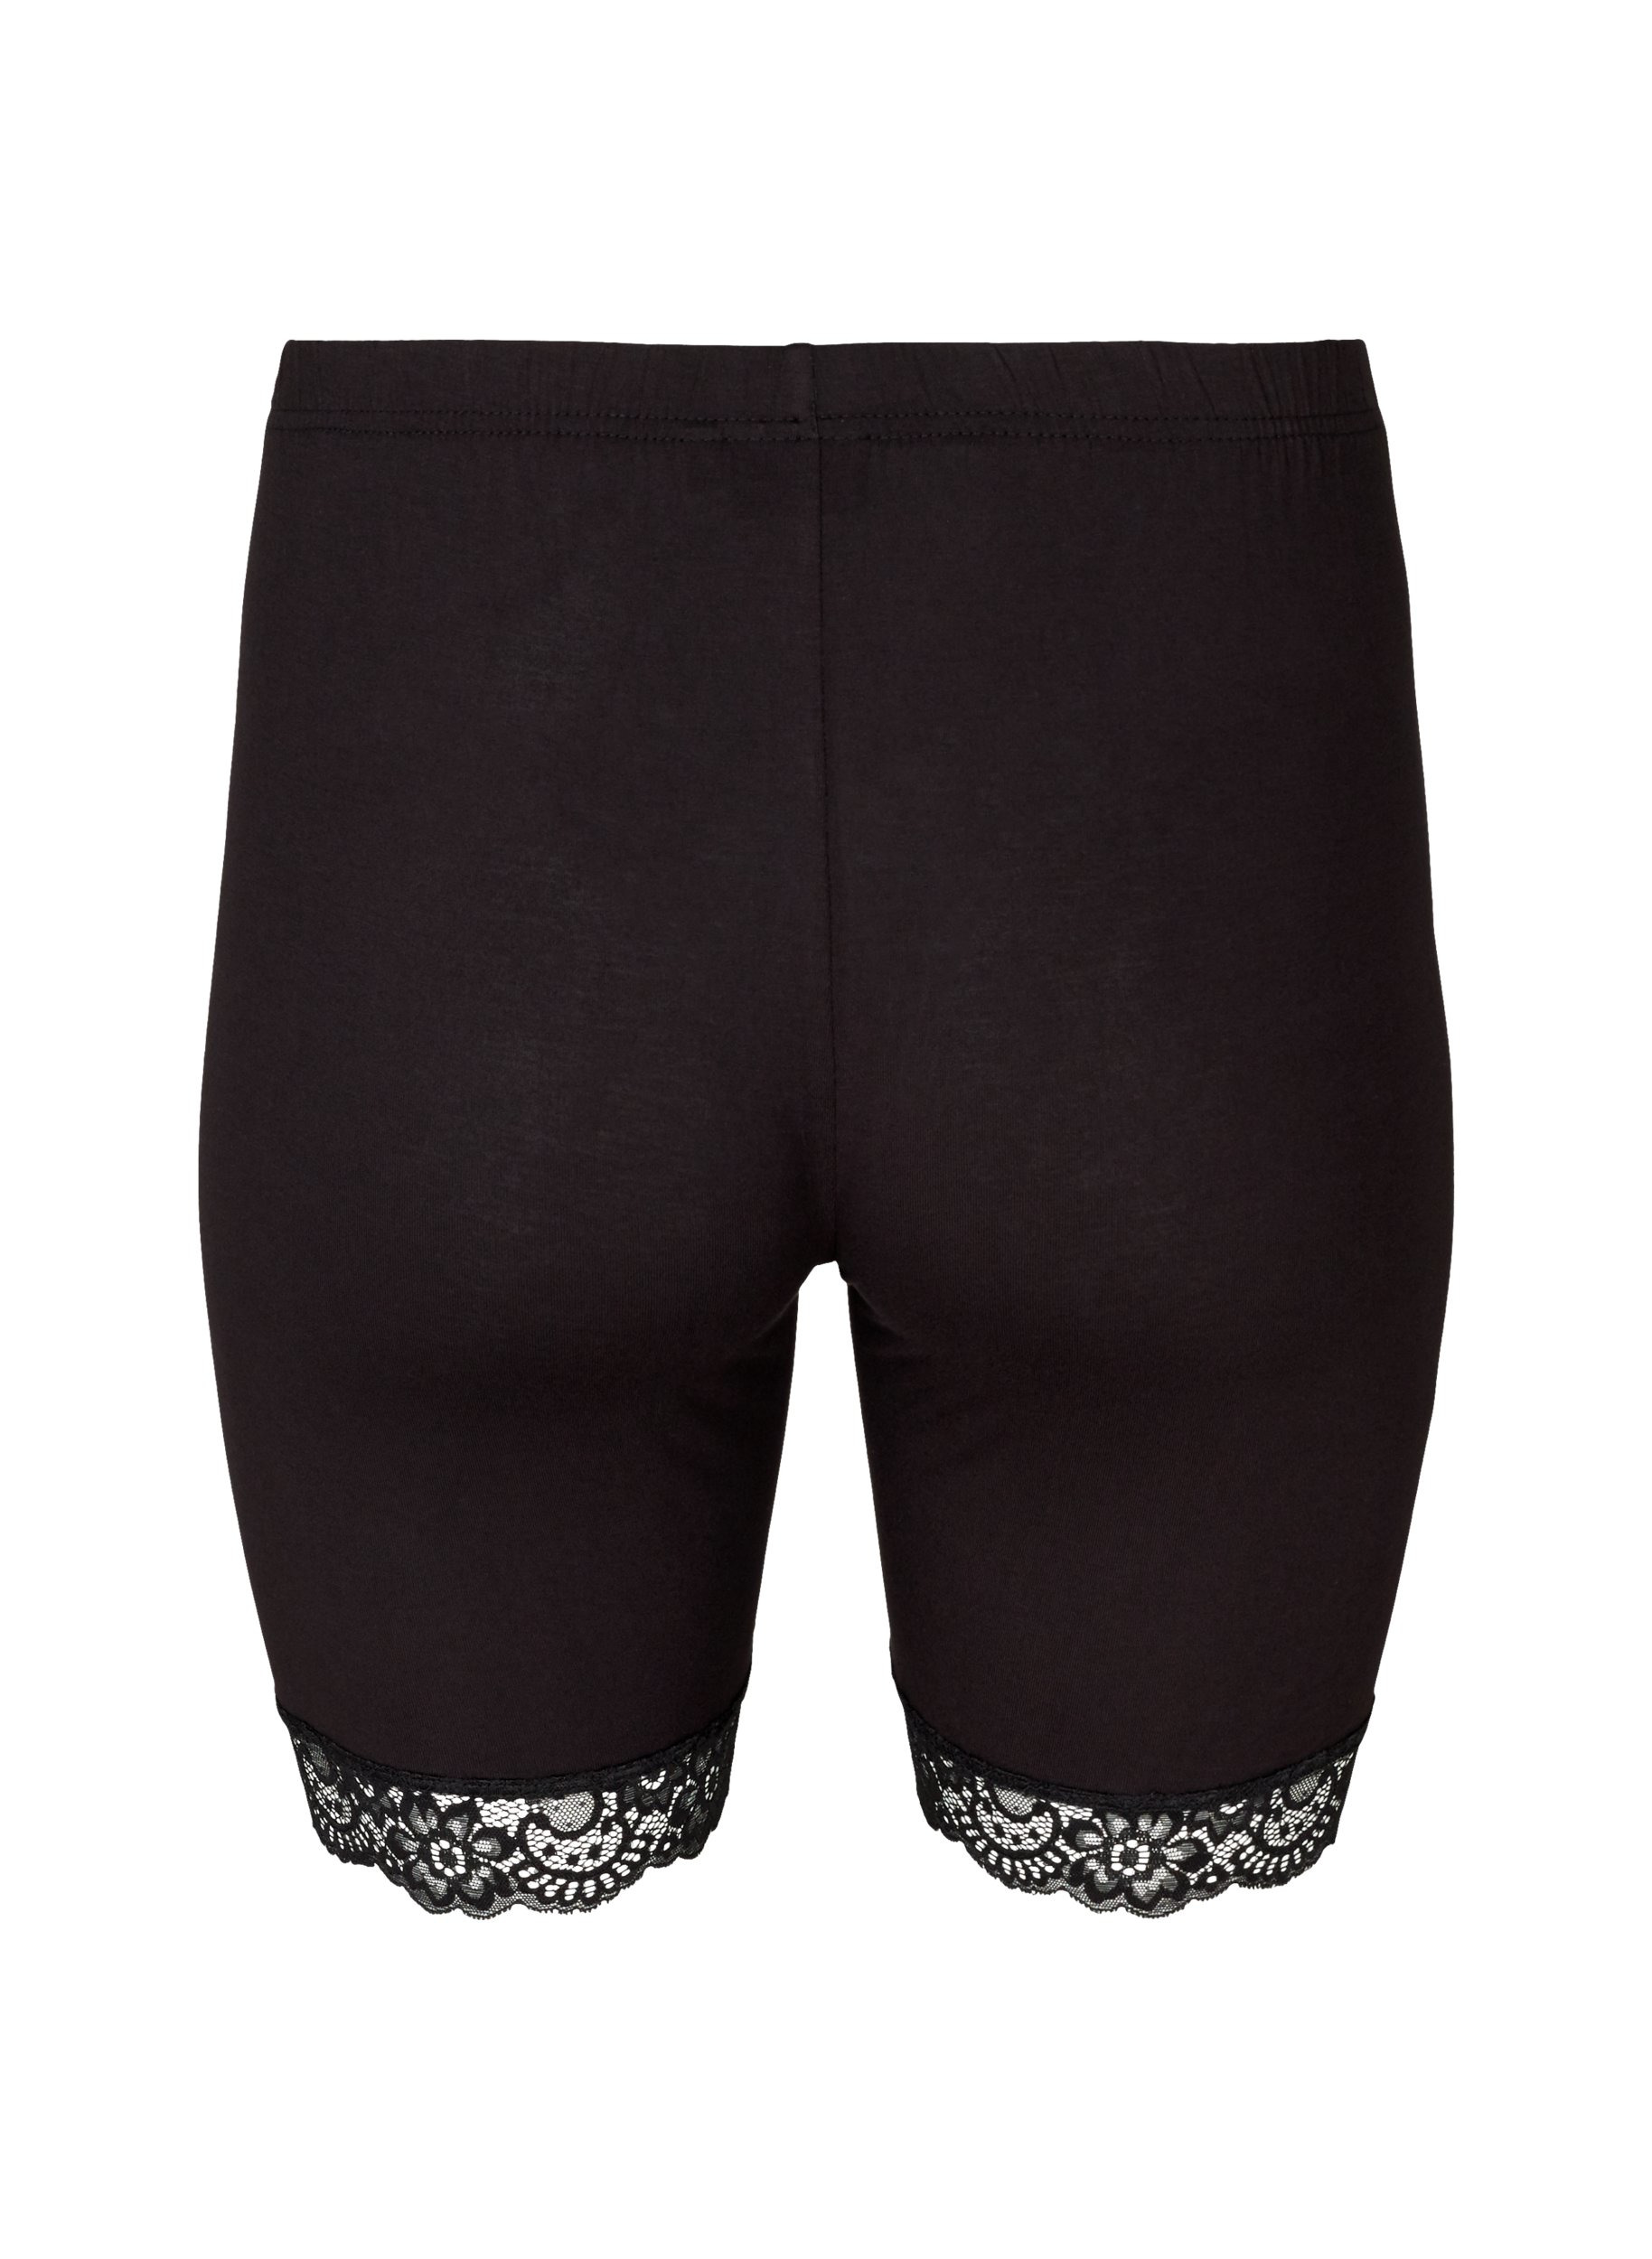 Cycling shorts with a lace trim, Black, Packshot image number 1